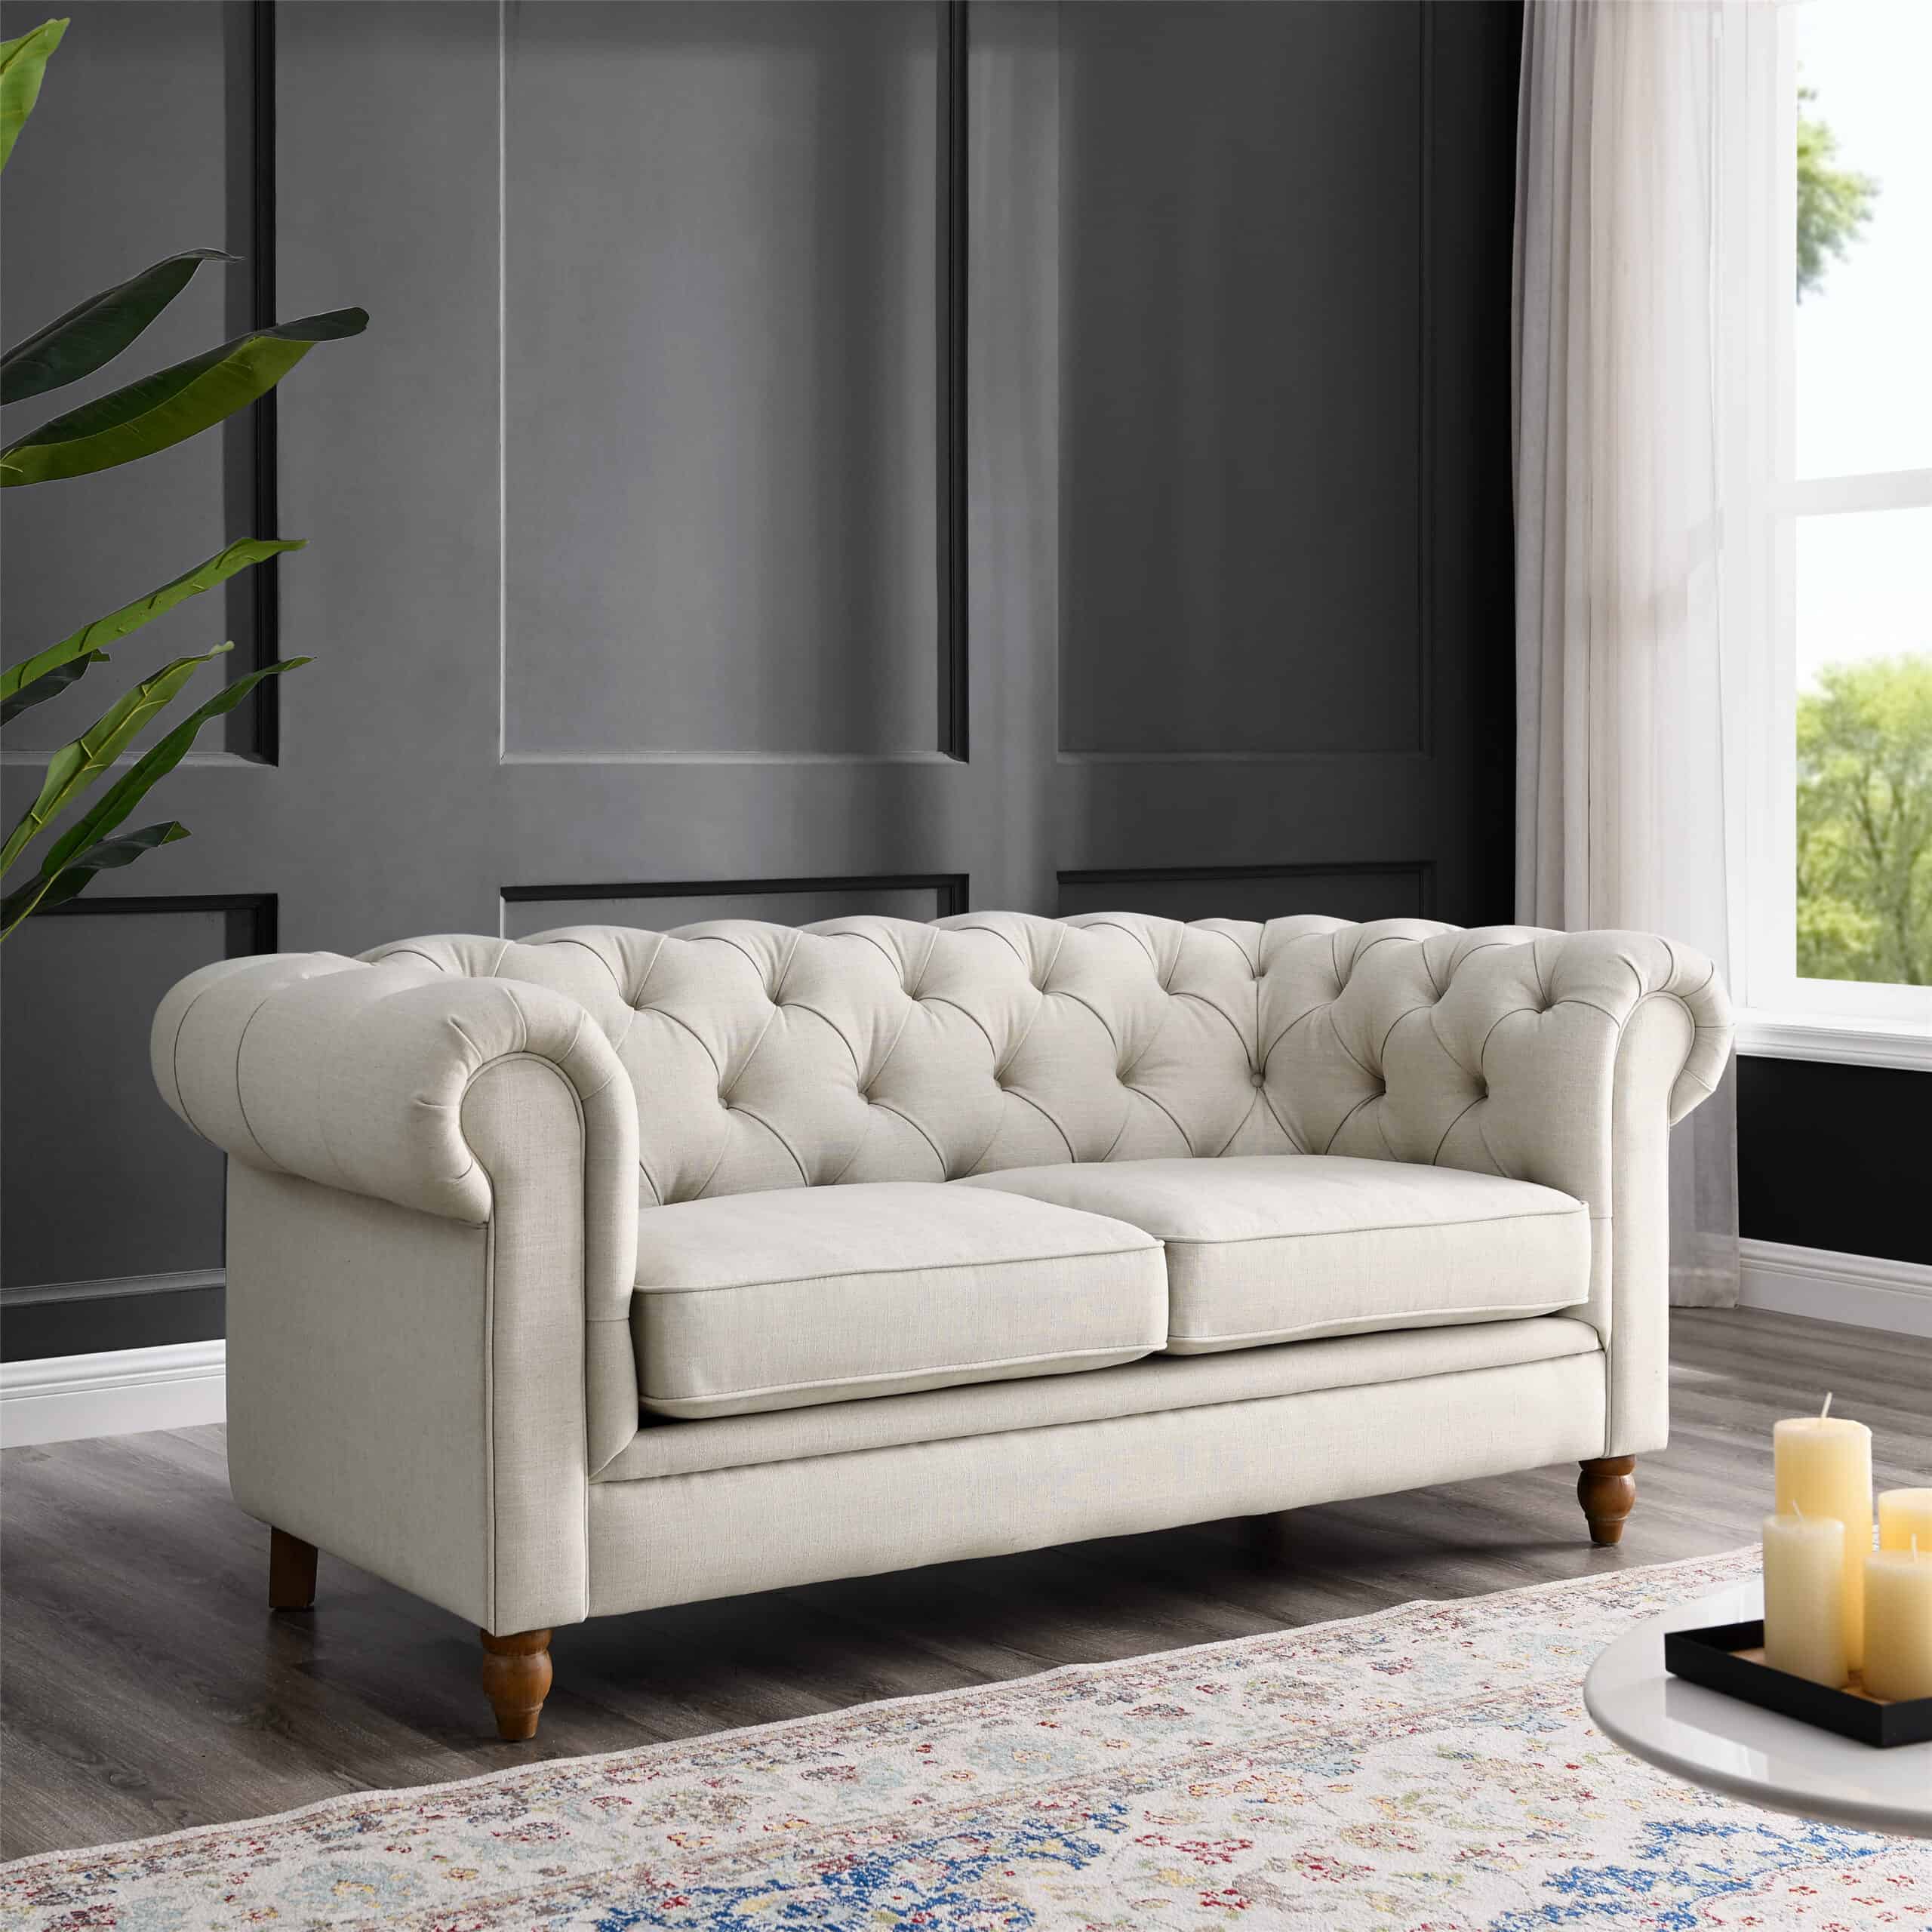 Amelia Natural Linen Two Seater Chesterfield Sofa